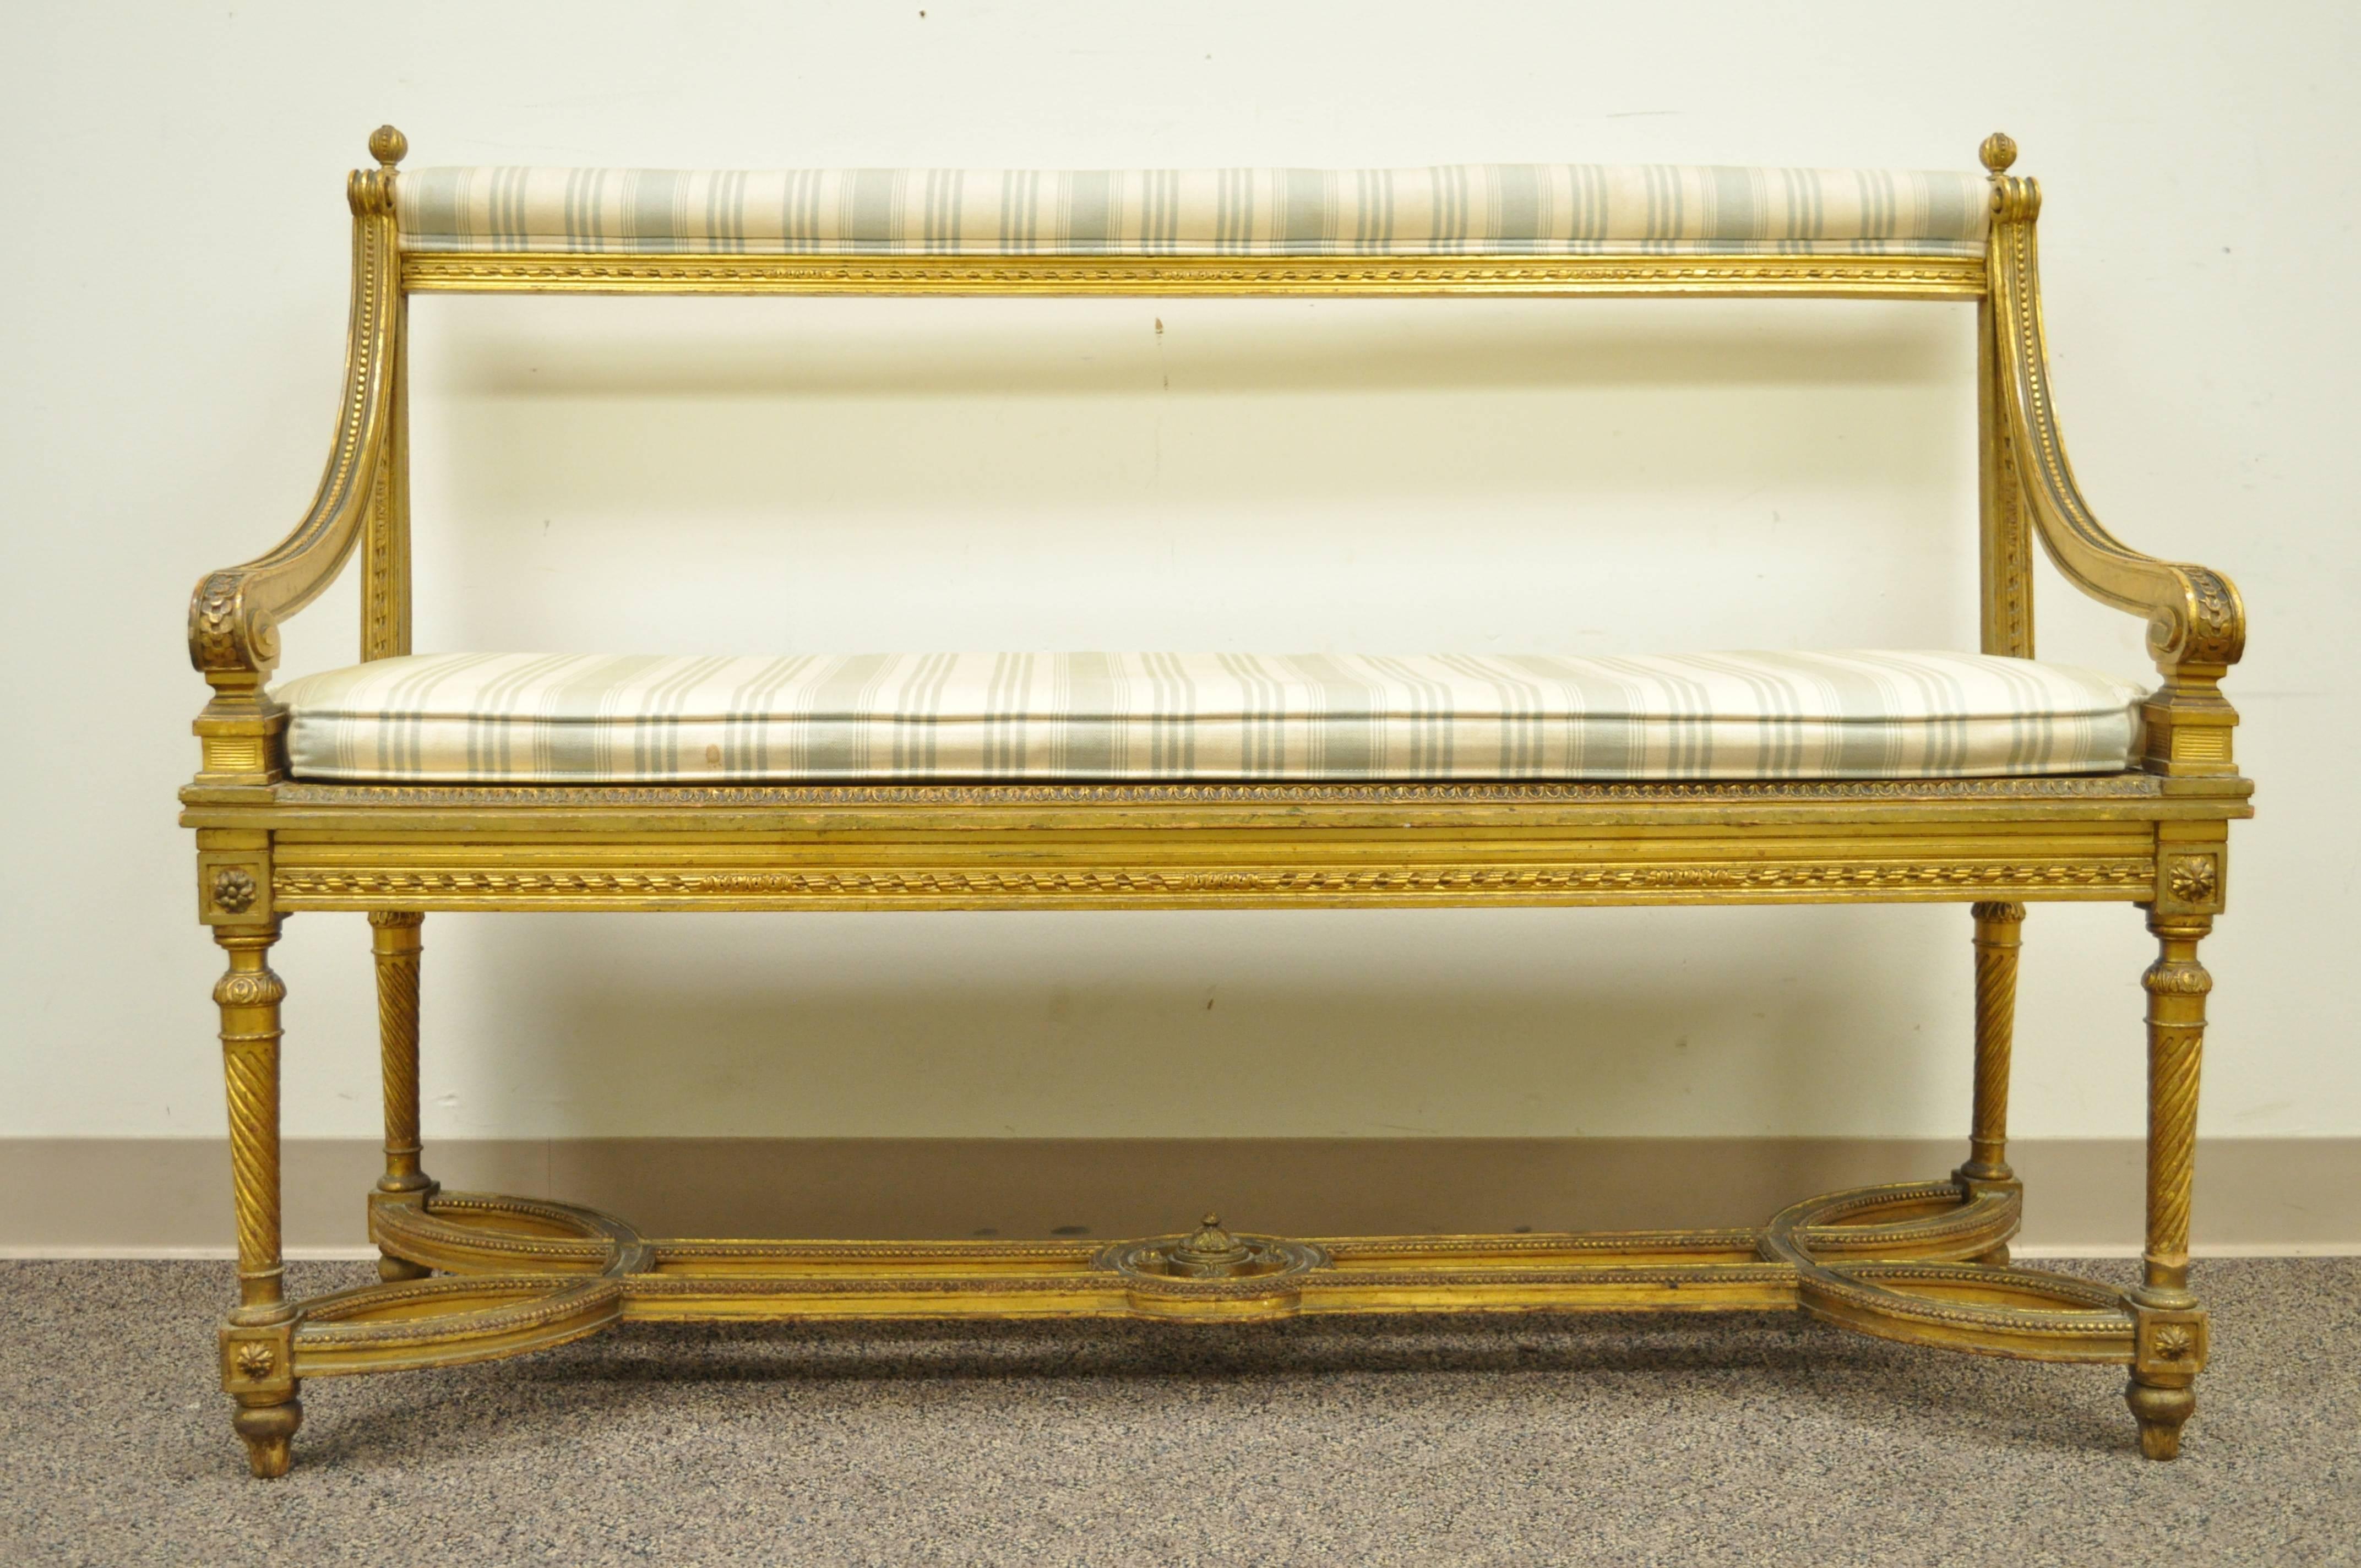 Very unique French giltwood bench in the Louis XVI taste. Item features an ornate stretcher supported base, swirl reeded legs, open back, cane seat, lose cushion, upholstered upper rail and elegant French form.

